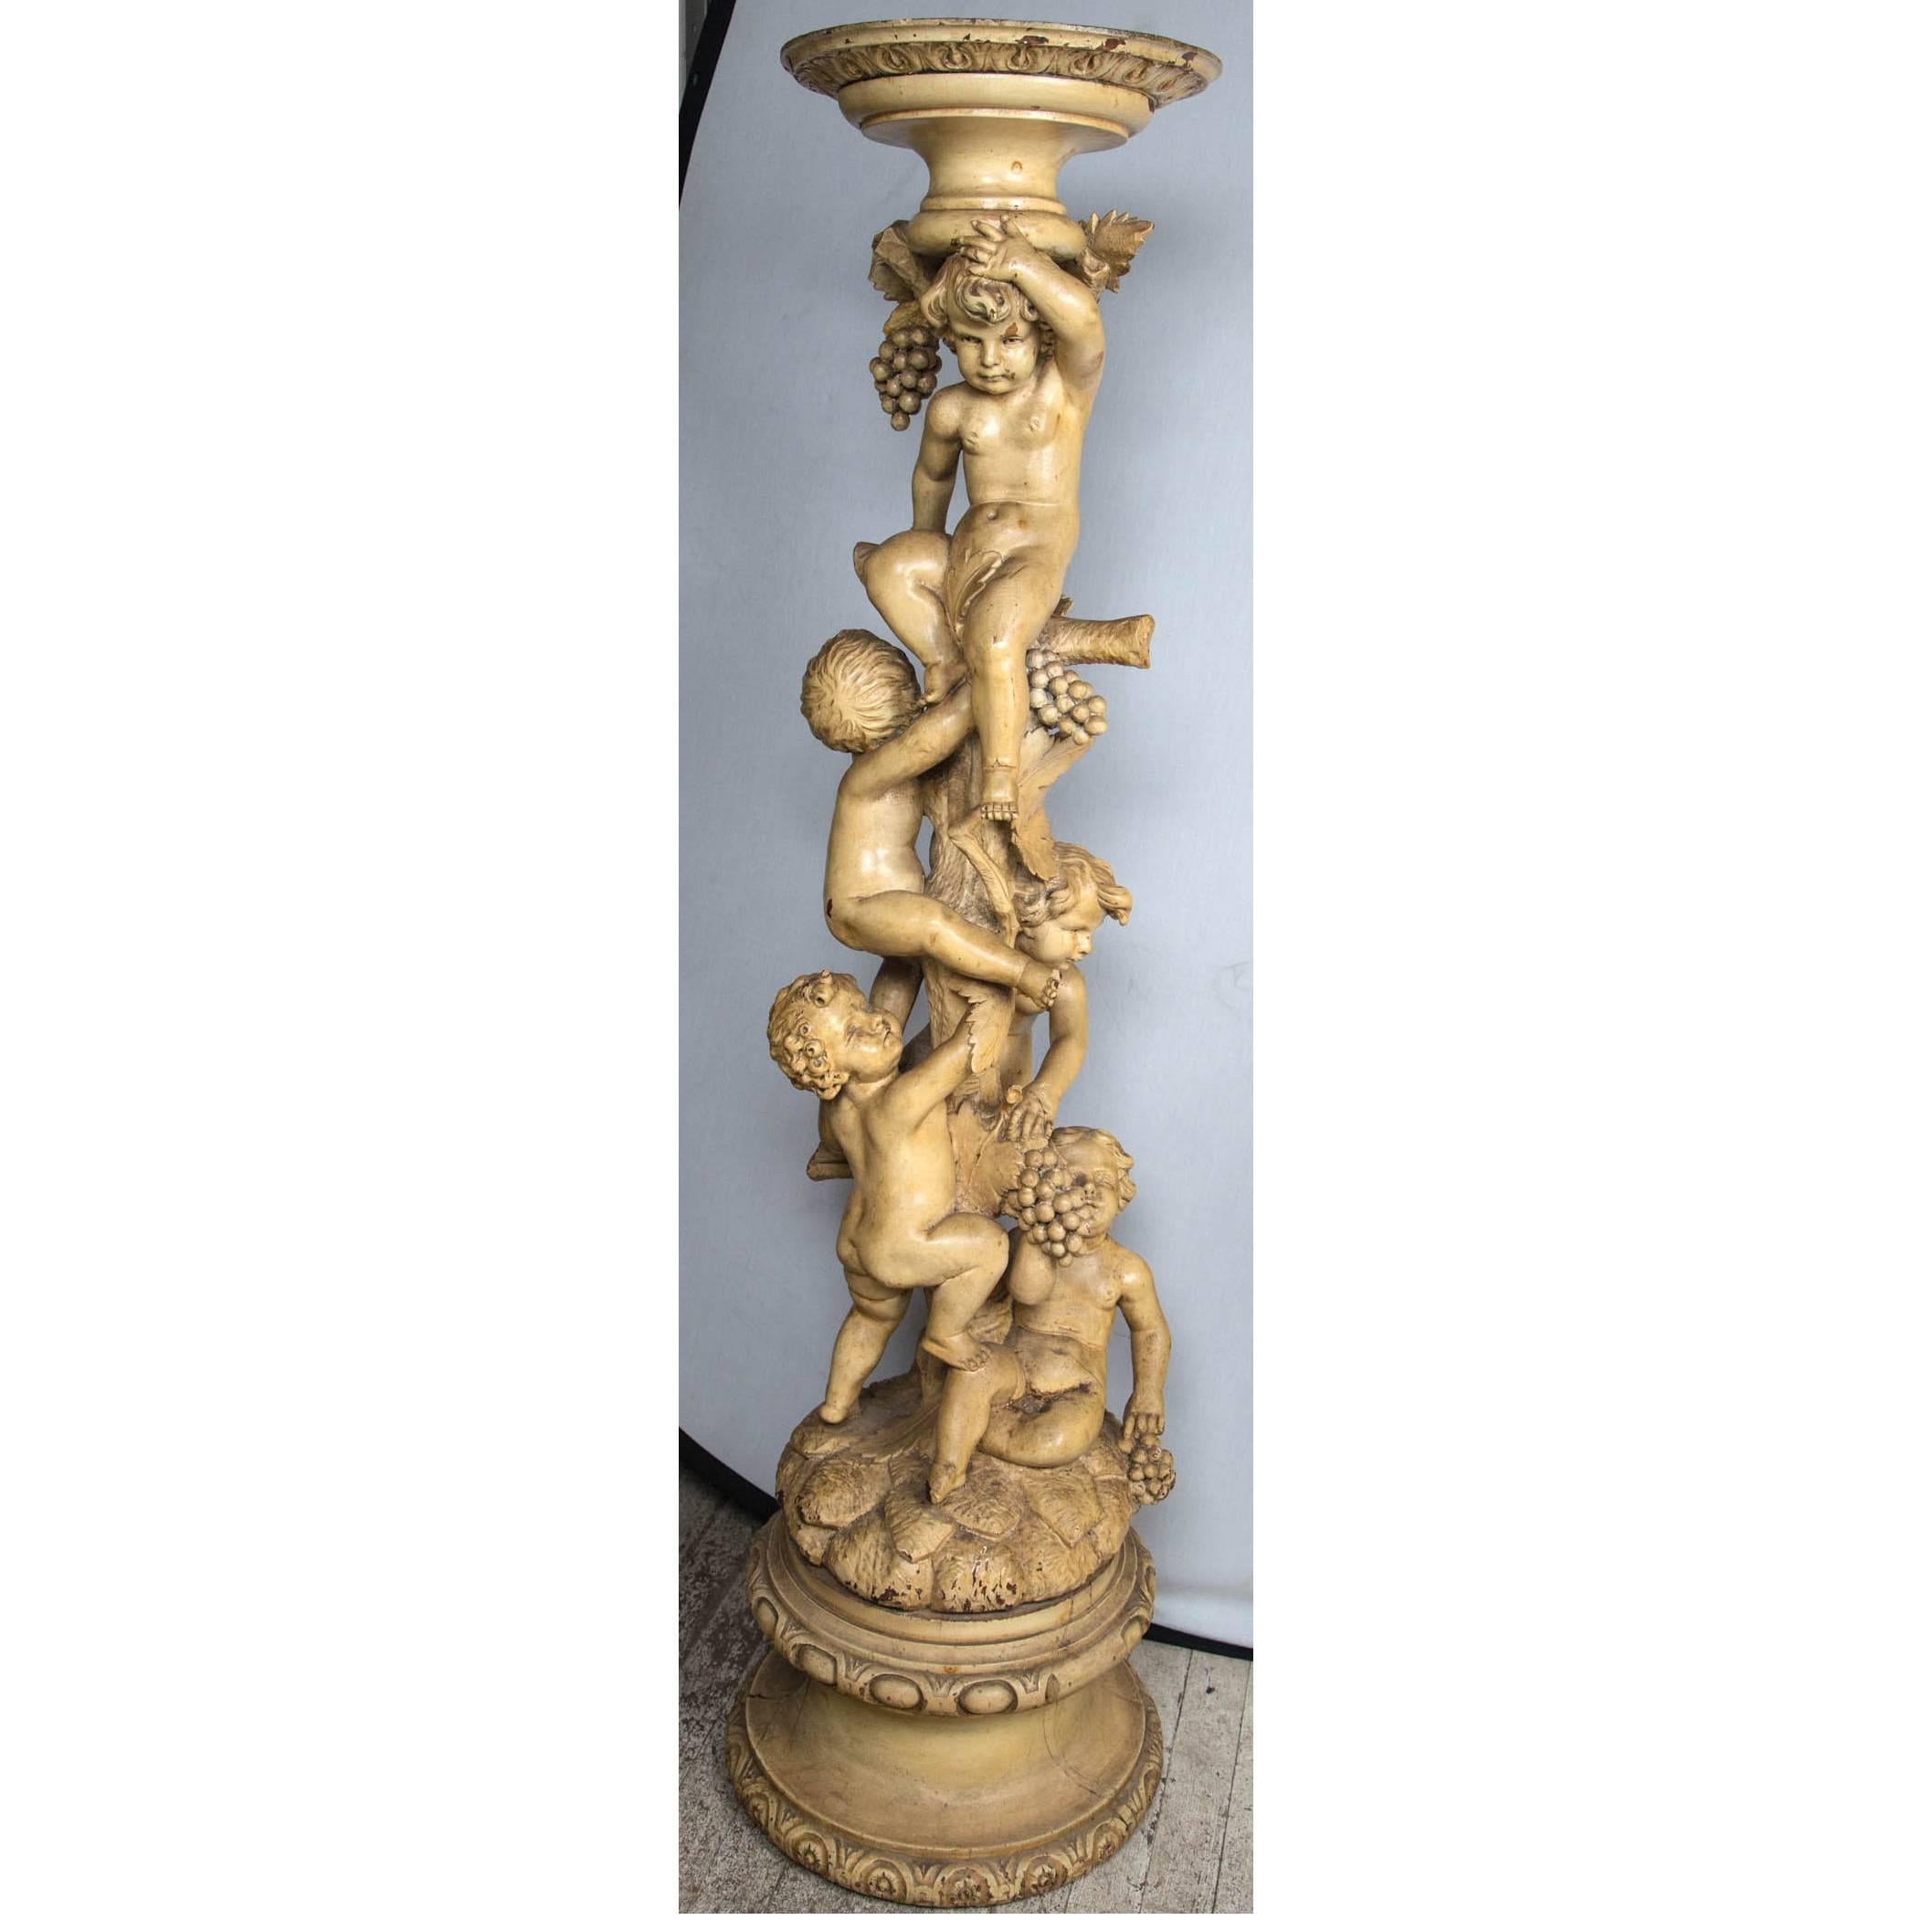 Hand-carved of a hard wood and painted in deep cream color. Five putti amid grape leaves and bunches of grapes on a realistic column of vine.